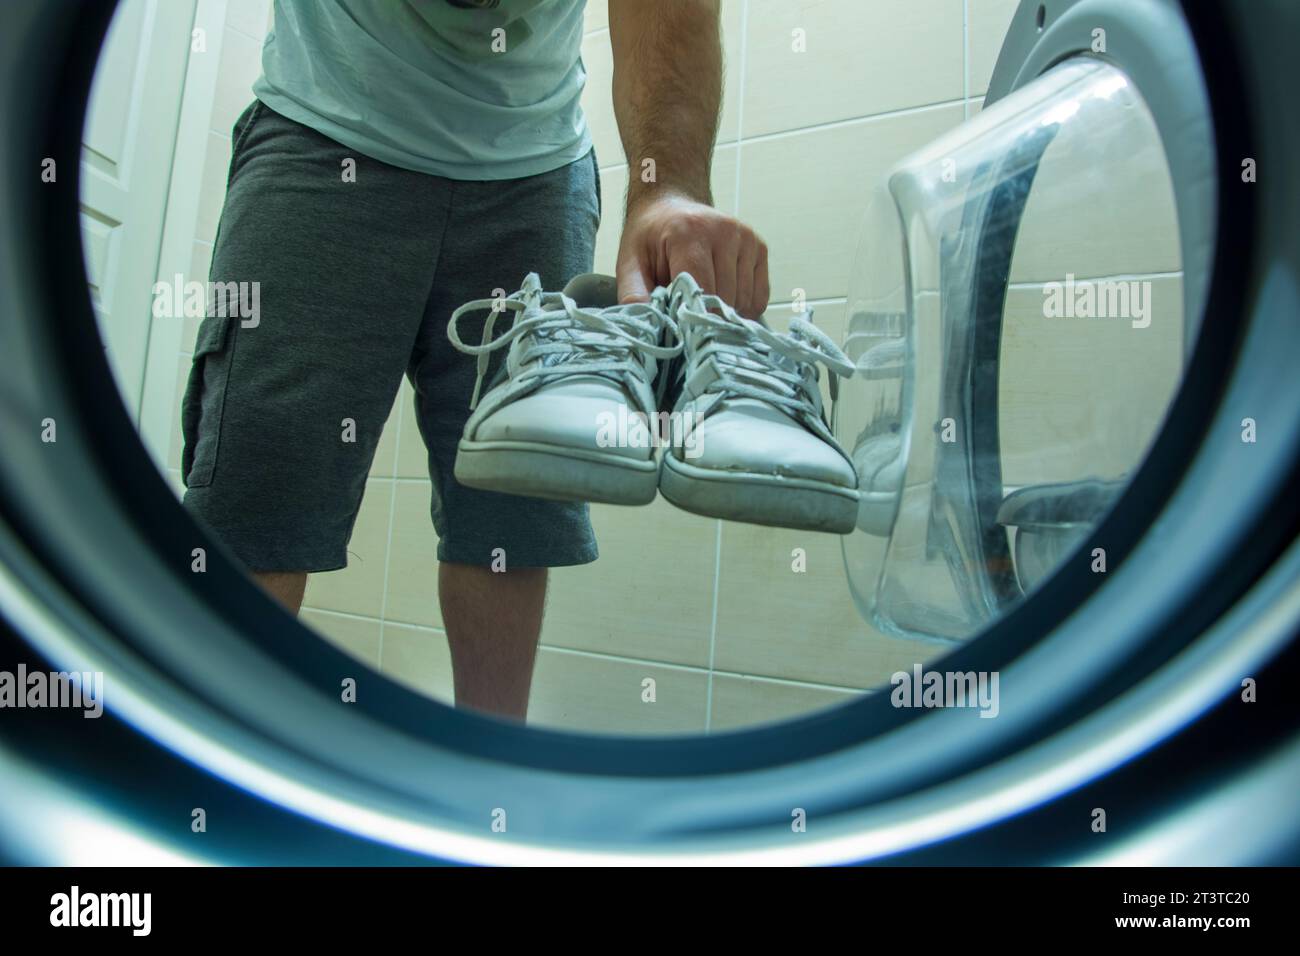 View from inside the washing machine of an unknown person putting dirty and old sneakers into the washing machine for washing Stock Photo